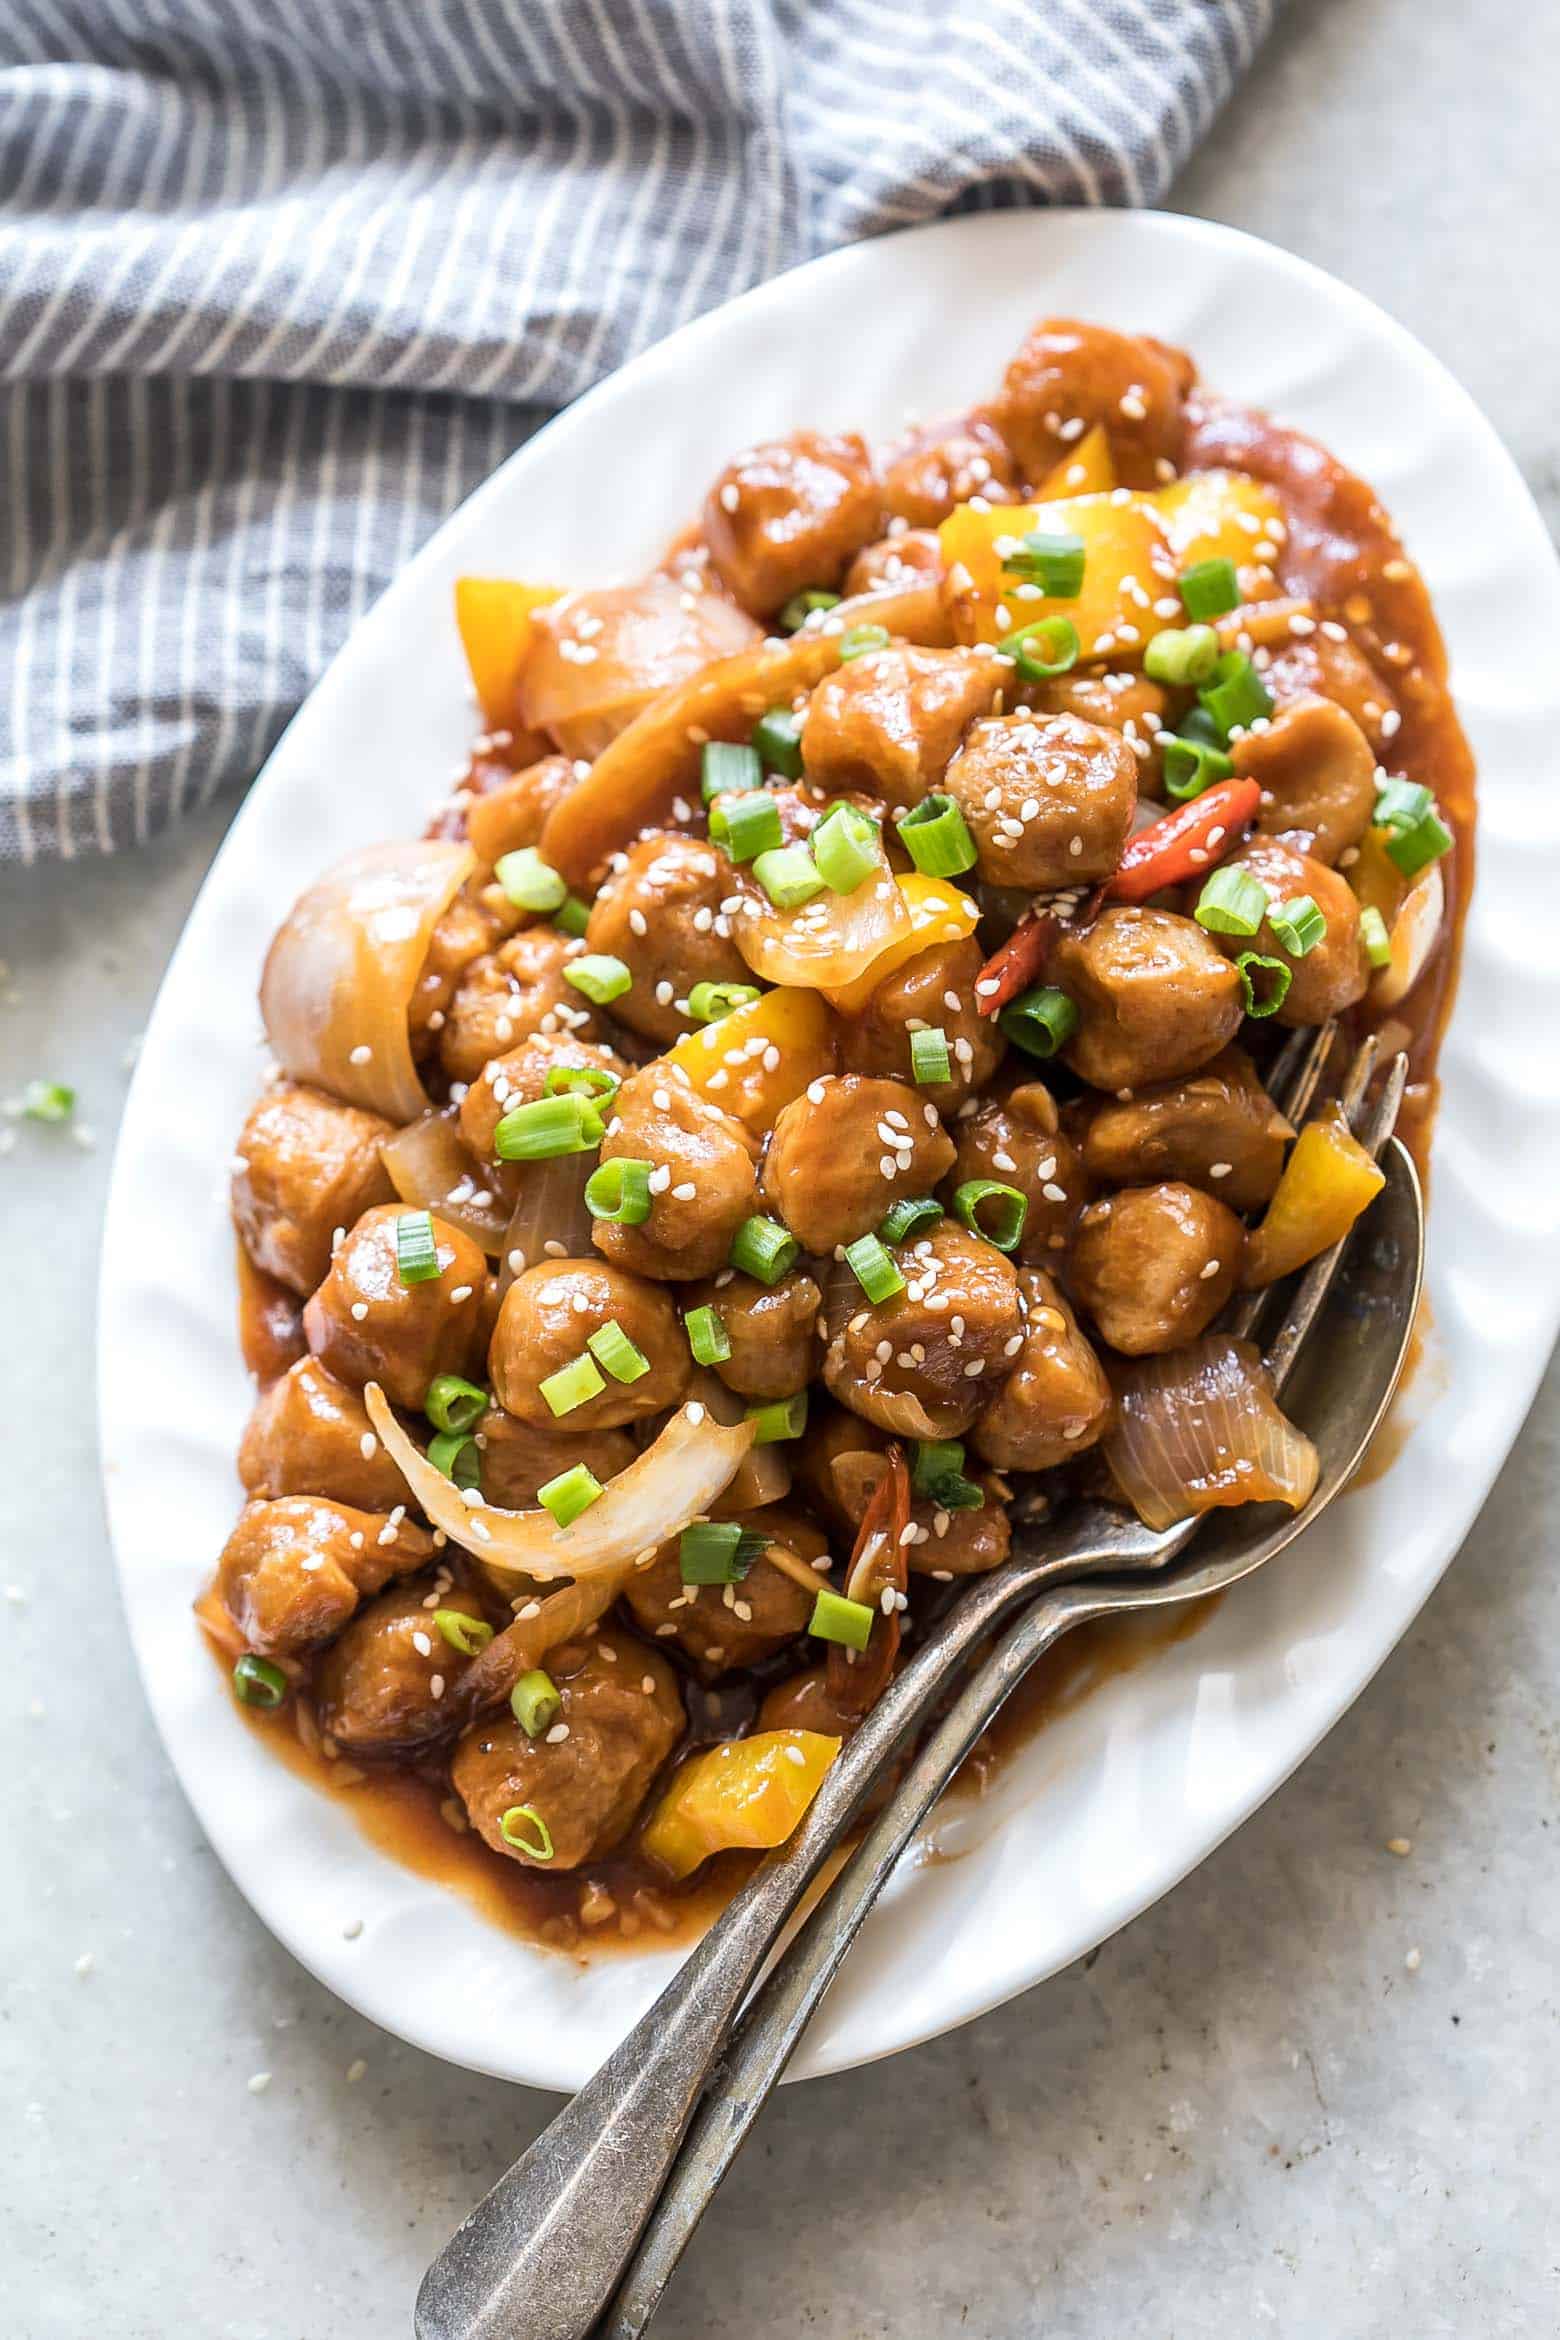 Soya Manchurian is a delicious Asian recipe where soya chunks are tossed in a sweet and spicy Chinese sauce. Goes best with hakka noodles and fried rice.